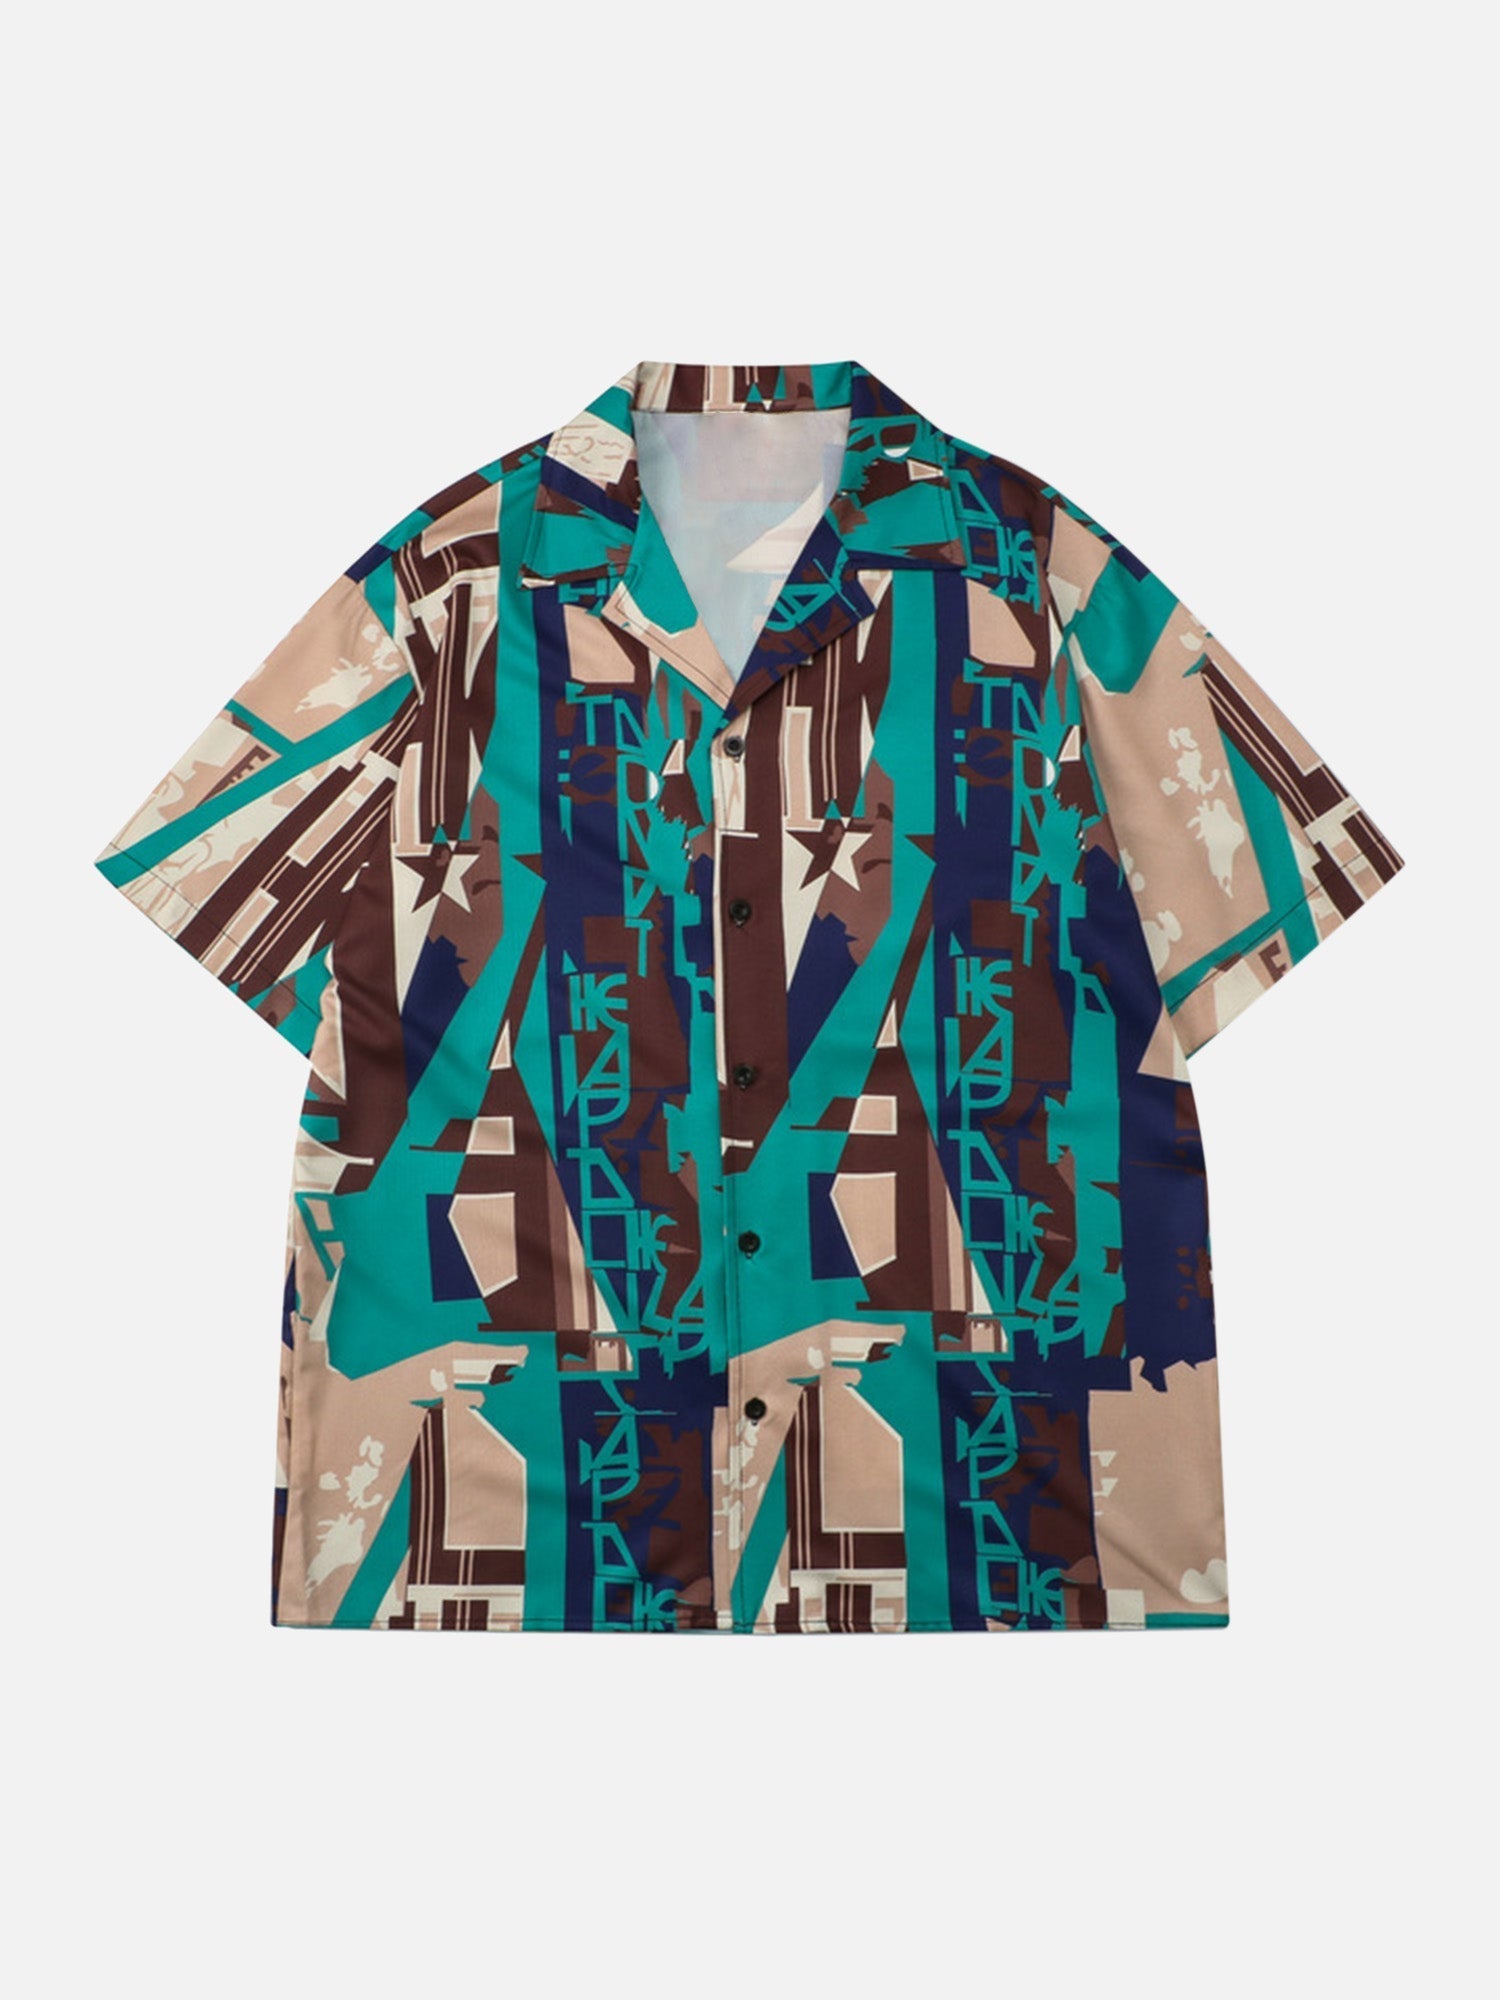 Abstract Fun All-over Printed Rap Shirts Floral Shirt Short Suit